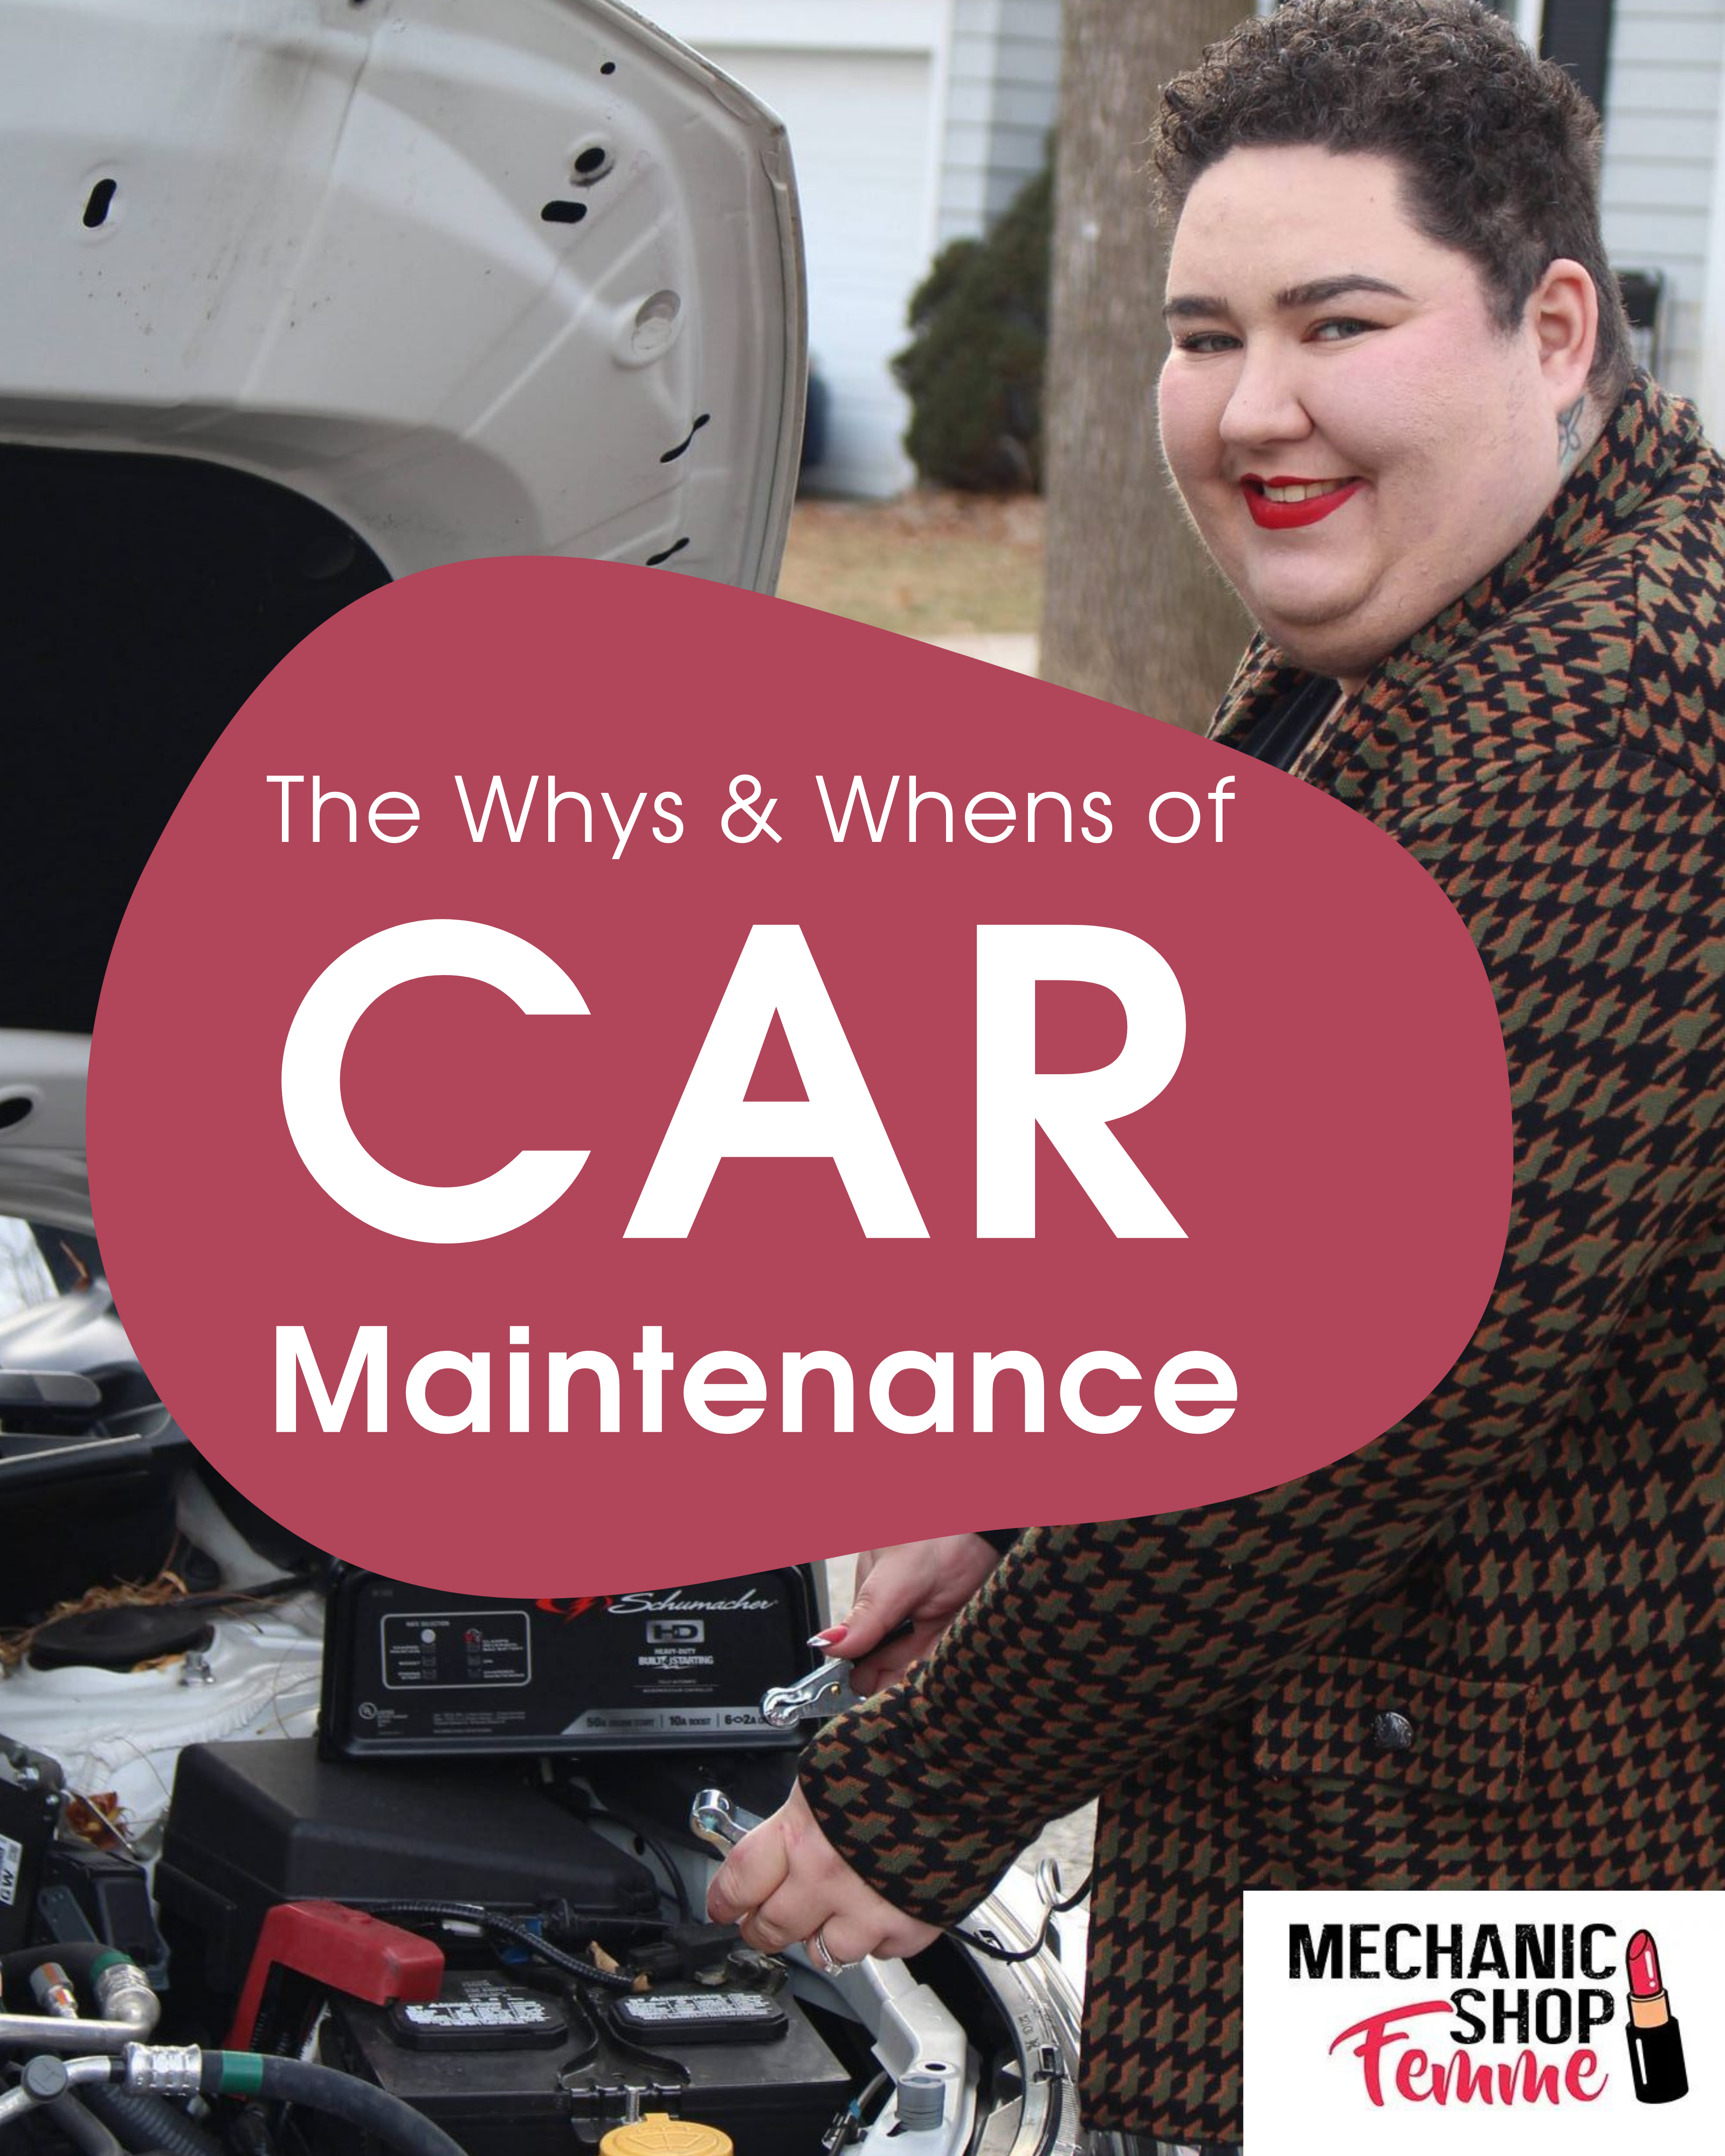 The Whys and Whens of Car Maintenance